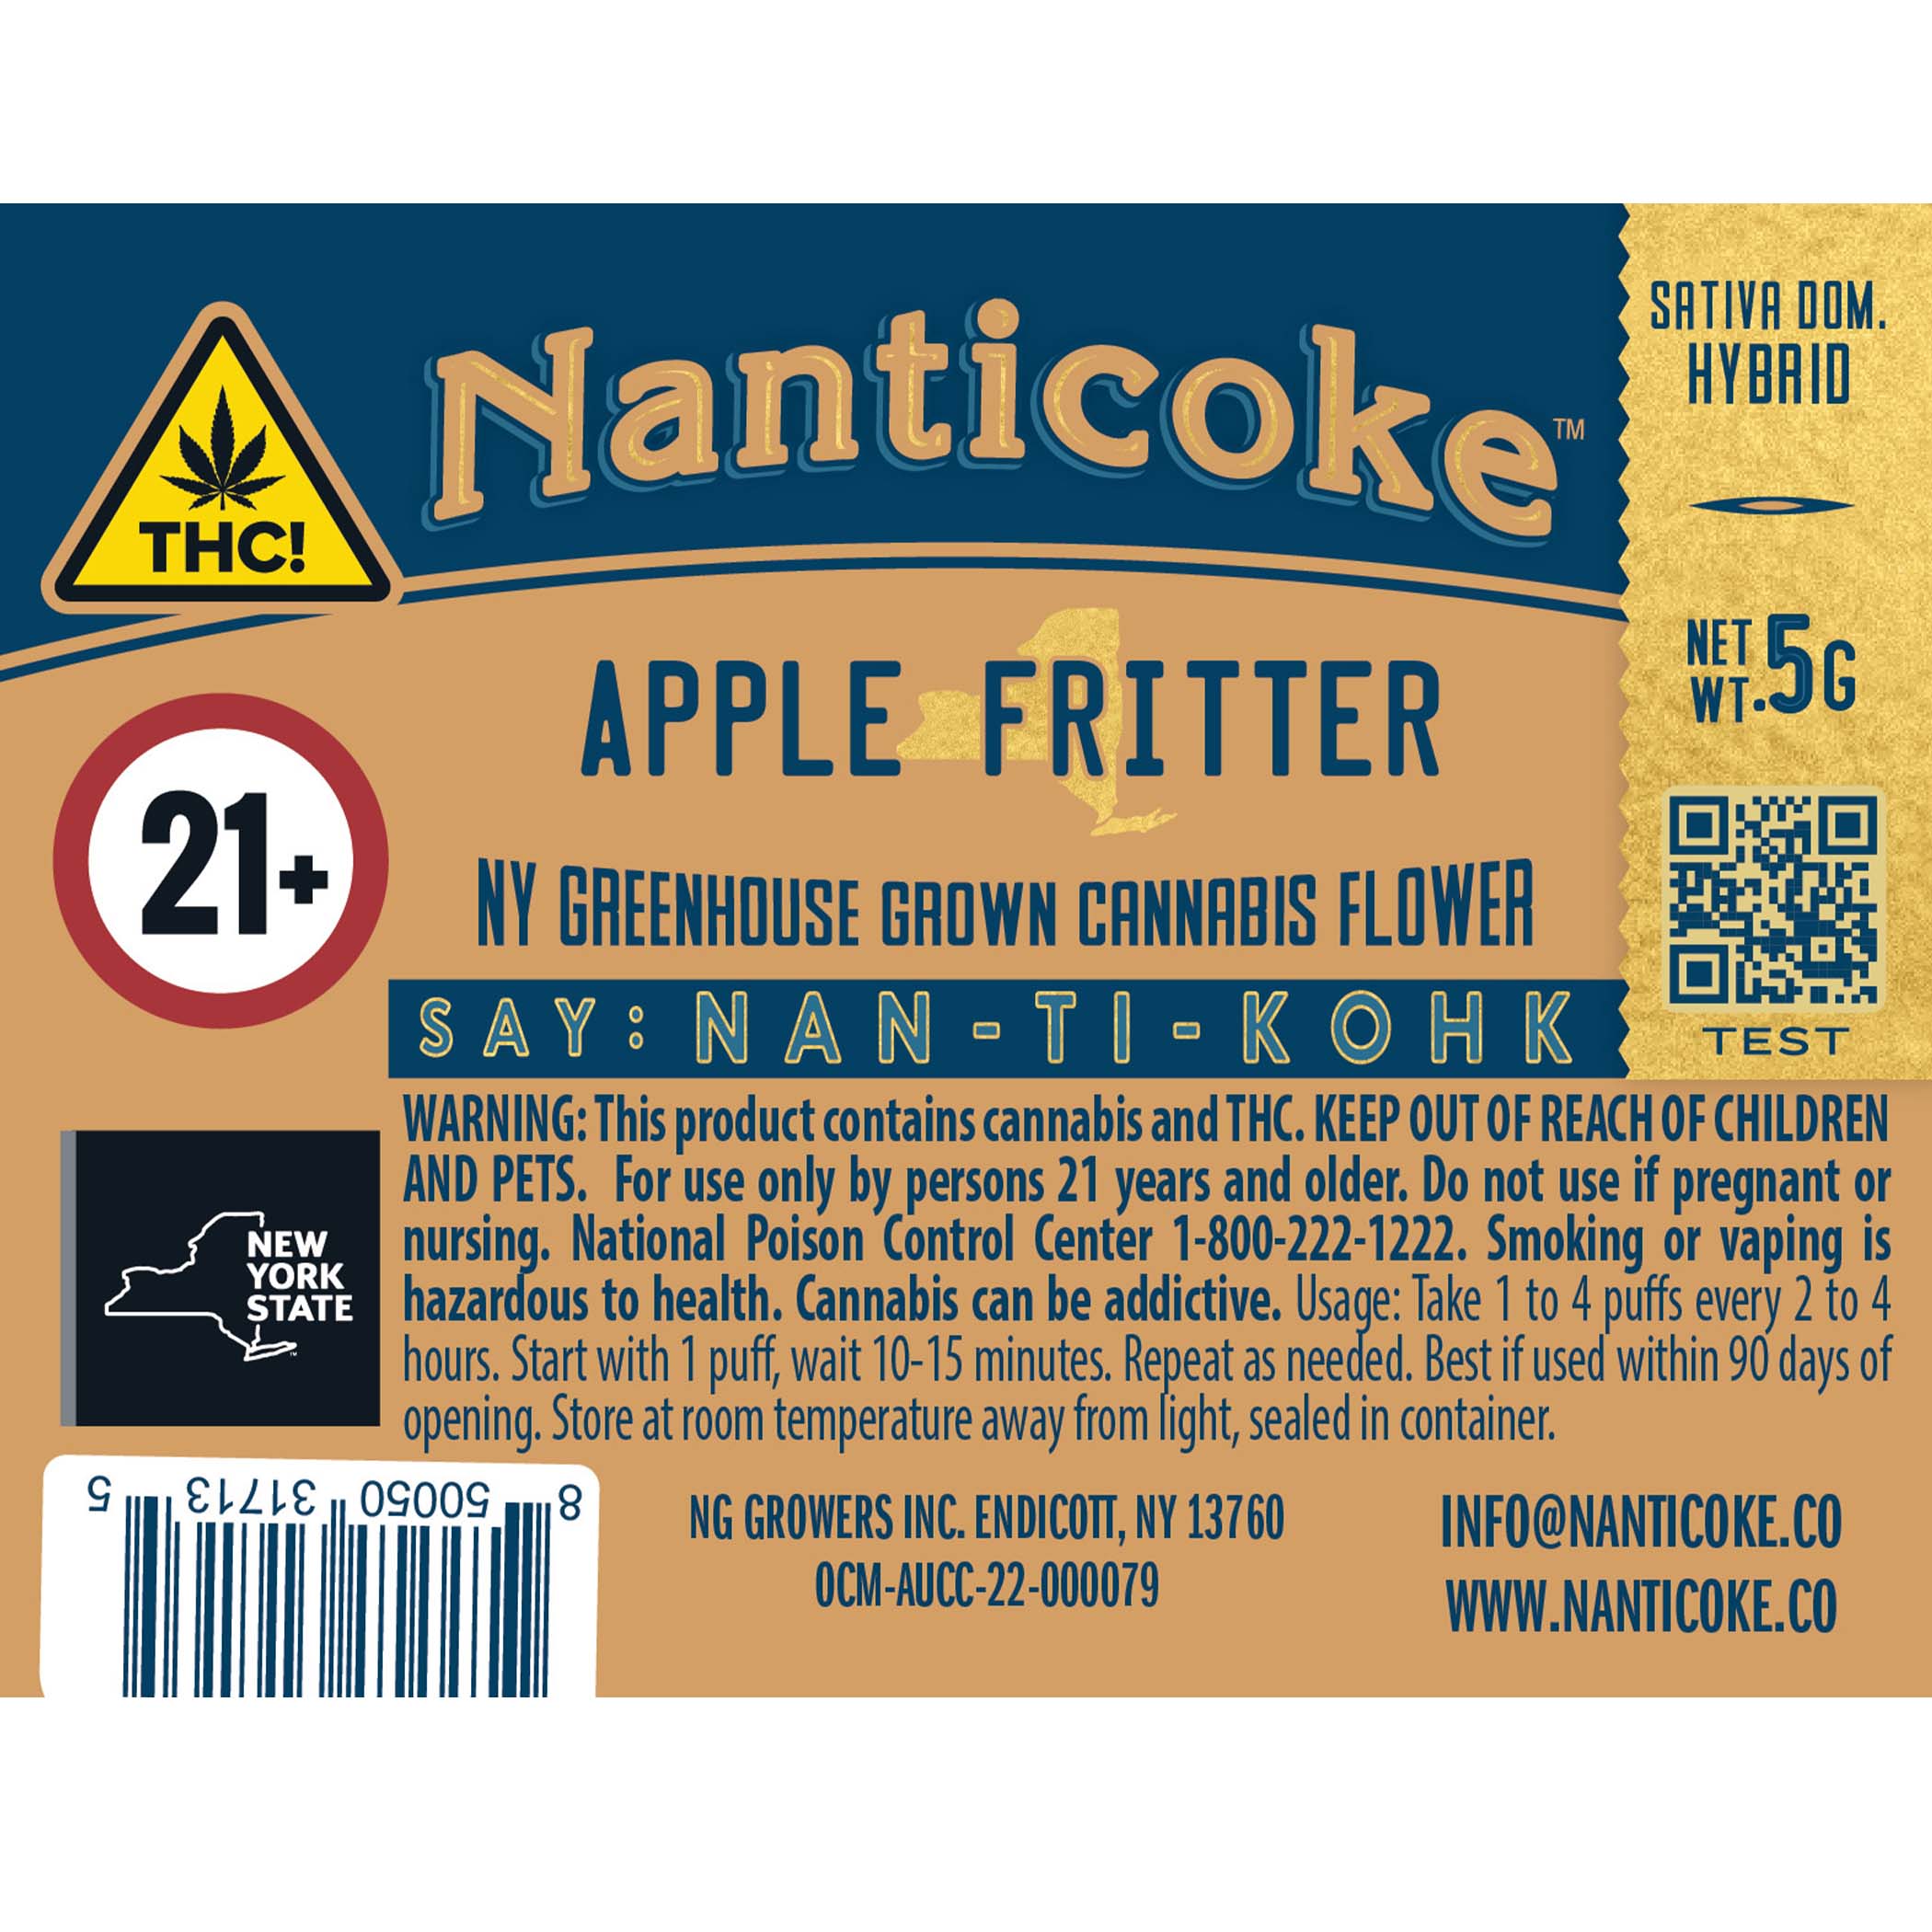 All Fritter pre-roll label